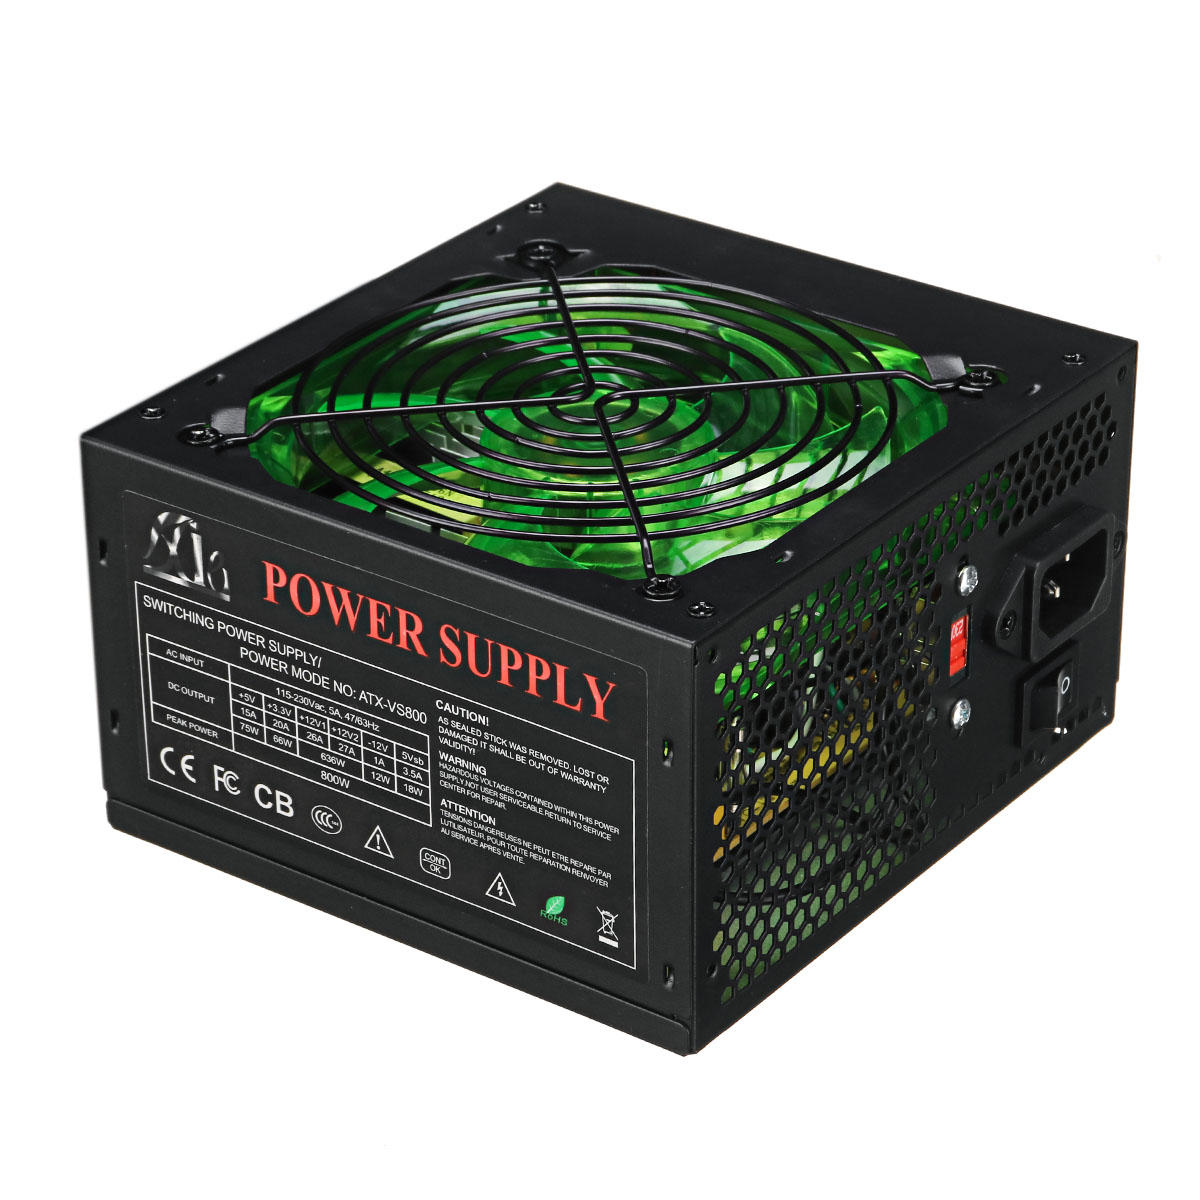 best price,800w,120mm,led,pin,pci,sata,atx,12v,computer,power,discount